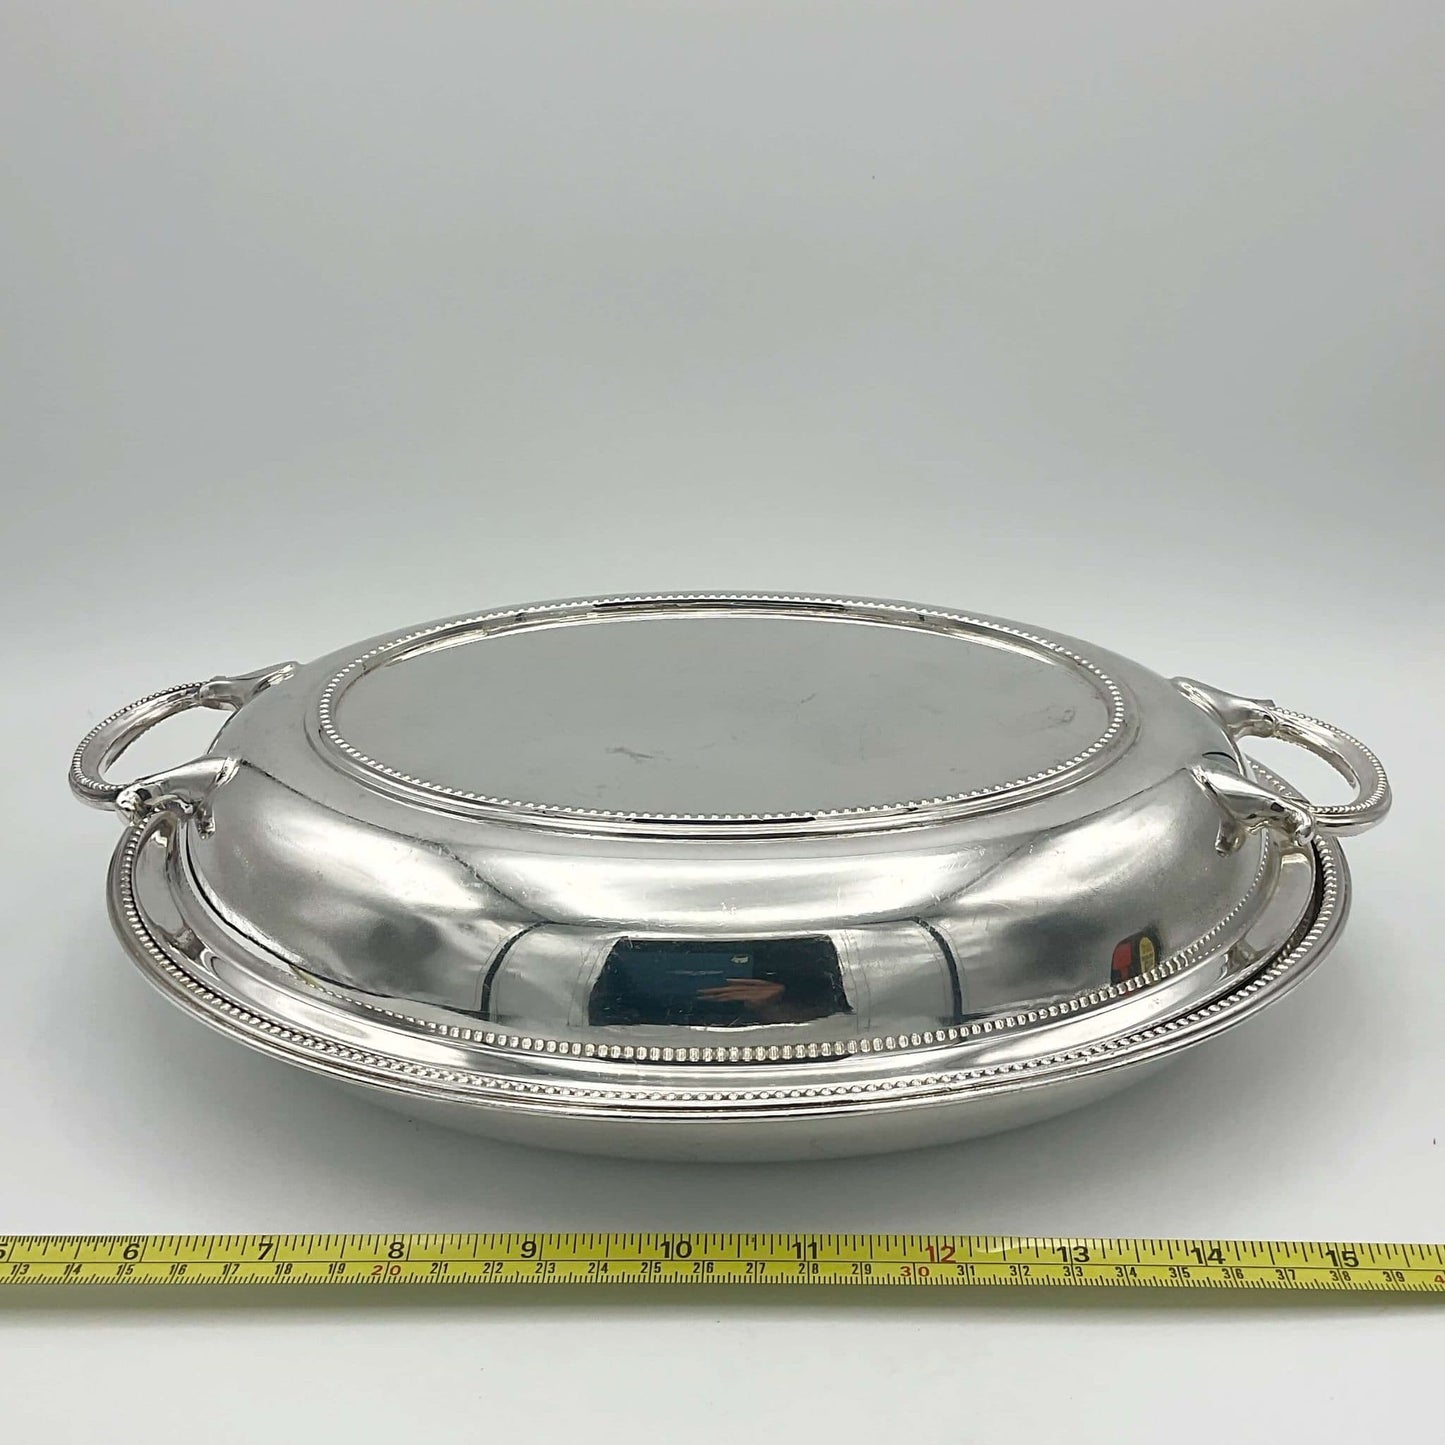 Mappin & Webb 1930s Entree Dish, Silver Plated Serving Dish